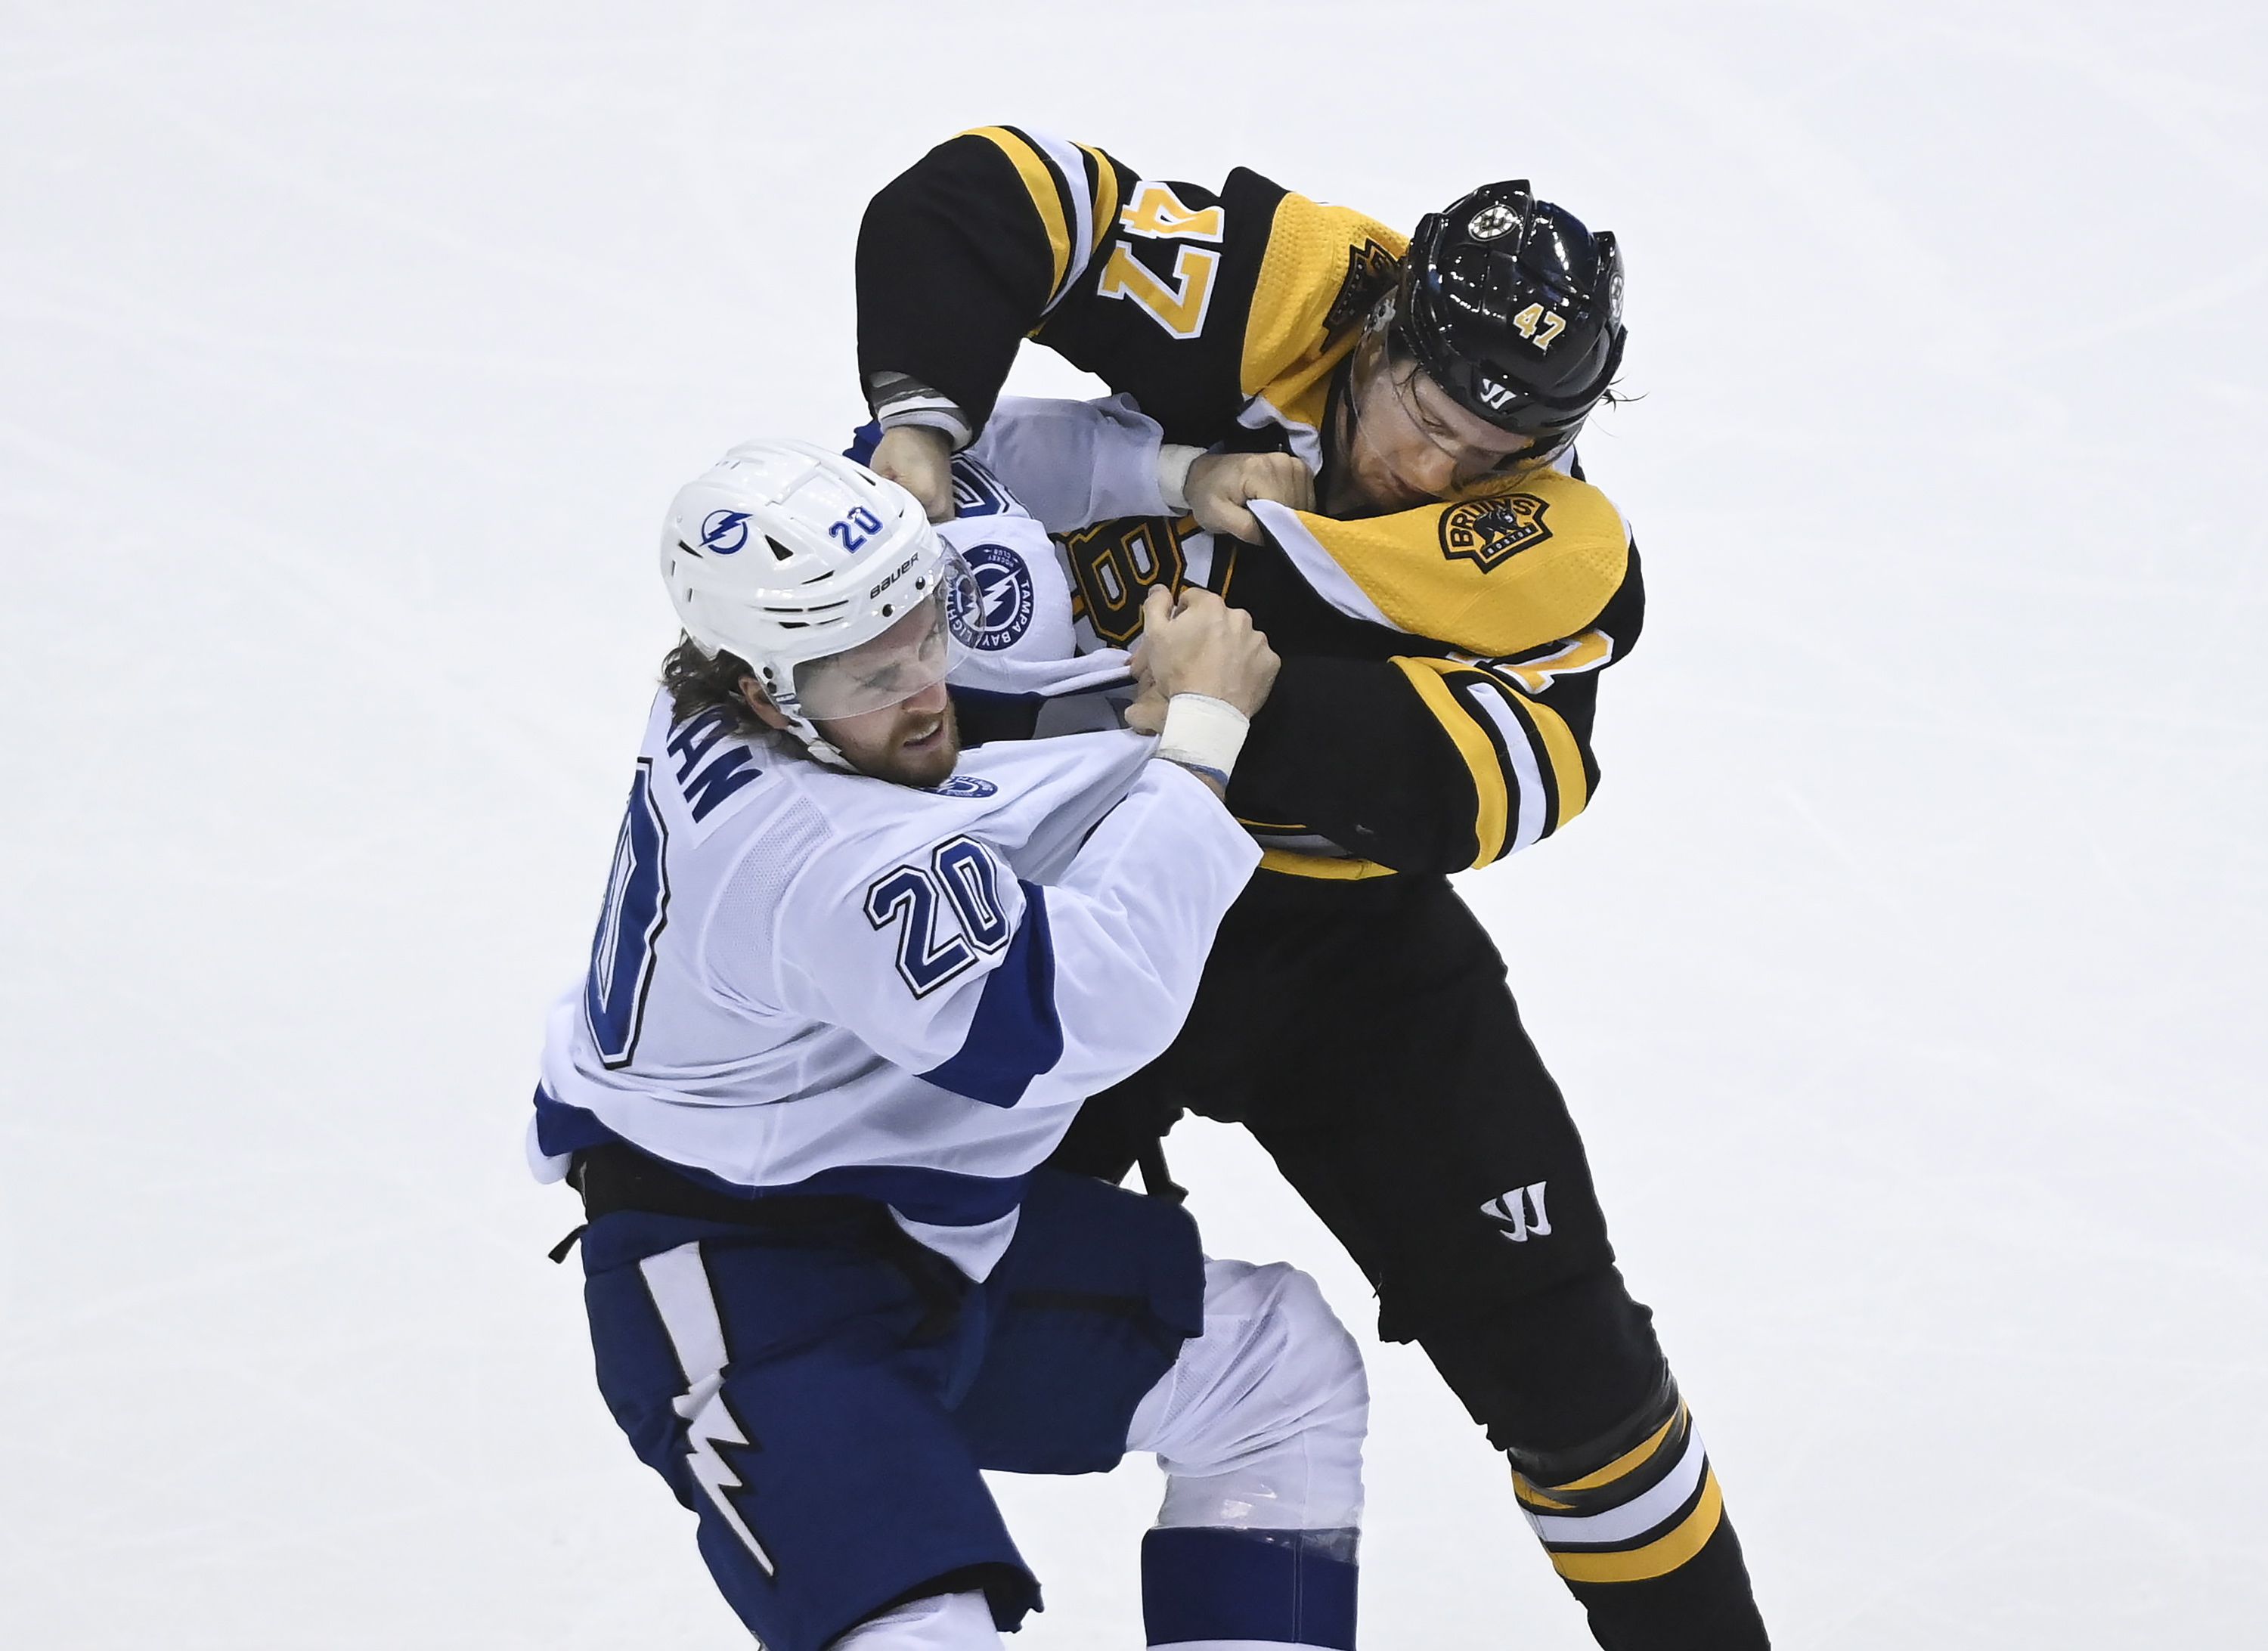 2020 NHL playoff preview: Lightning vs. Bruins - The Athletic